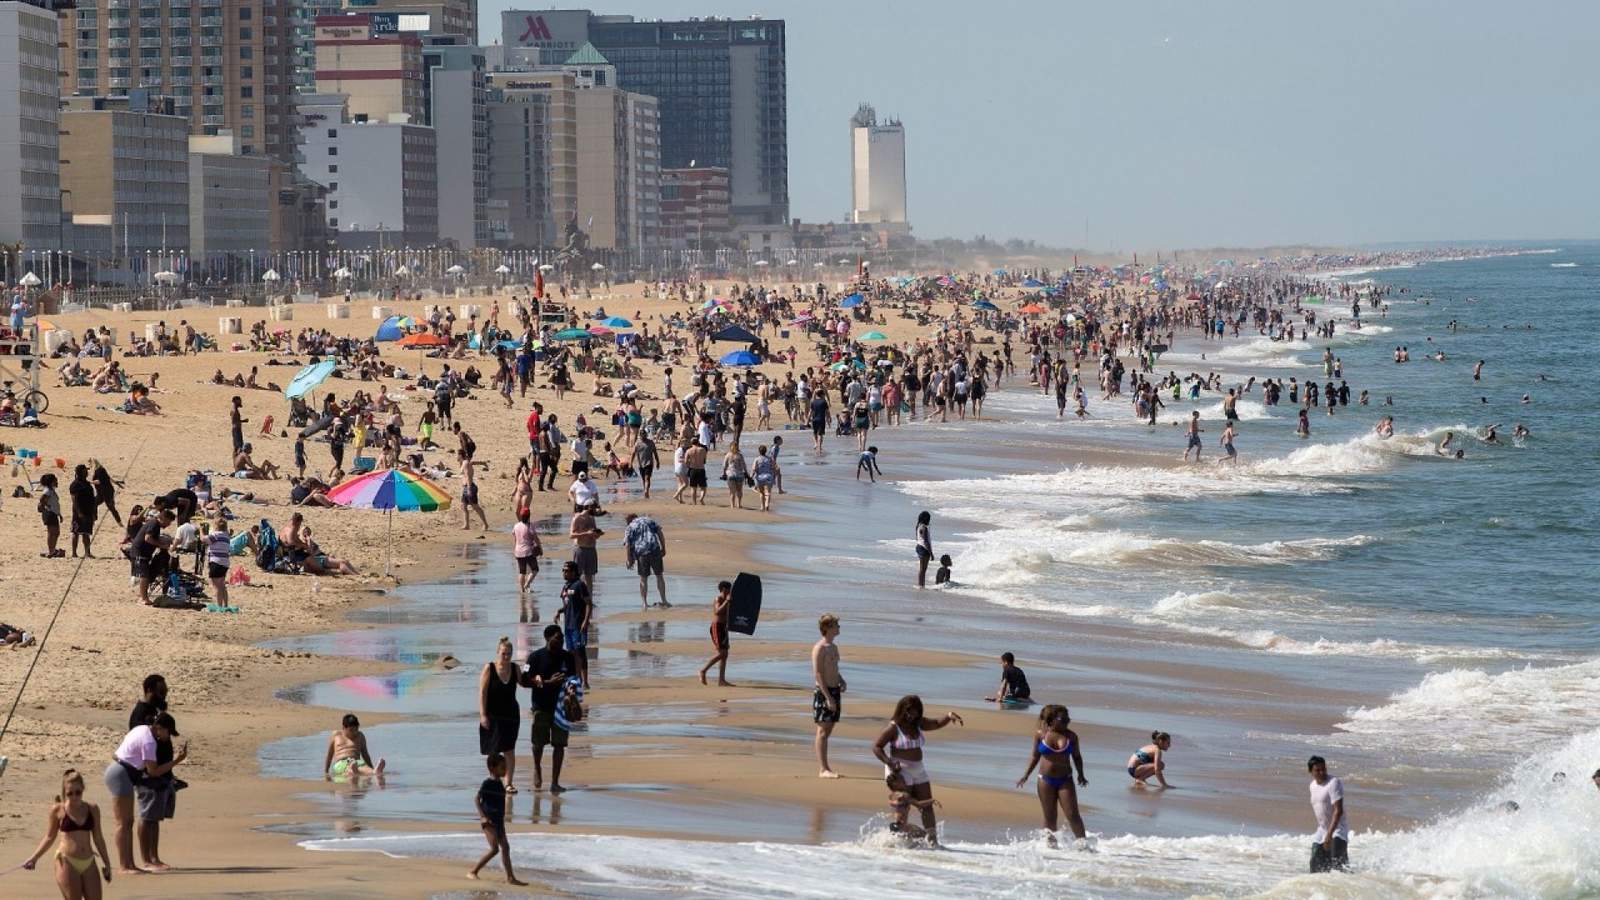 Virginia Beach’s beaches will open Friday for Memorial Day Weekend